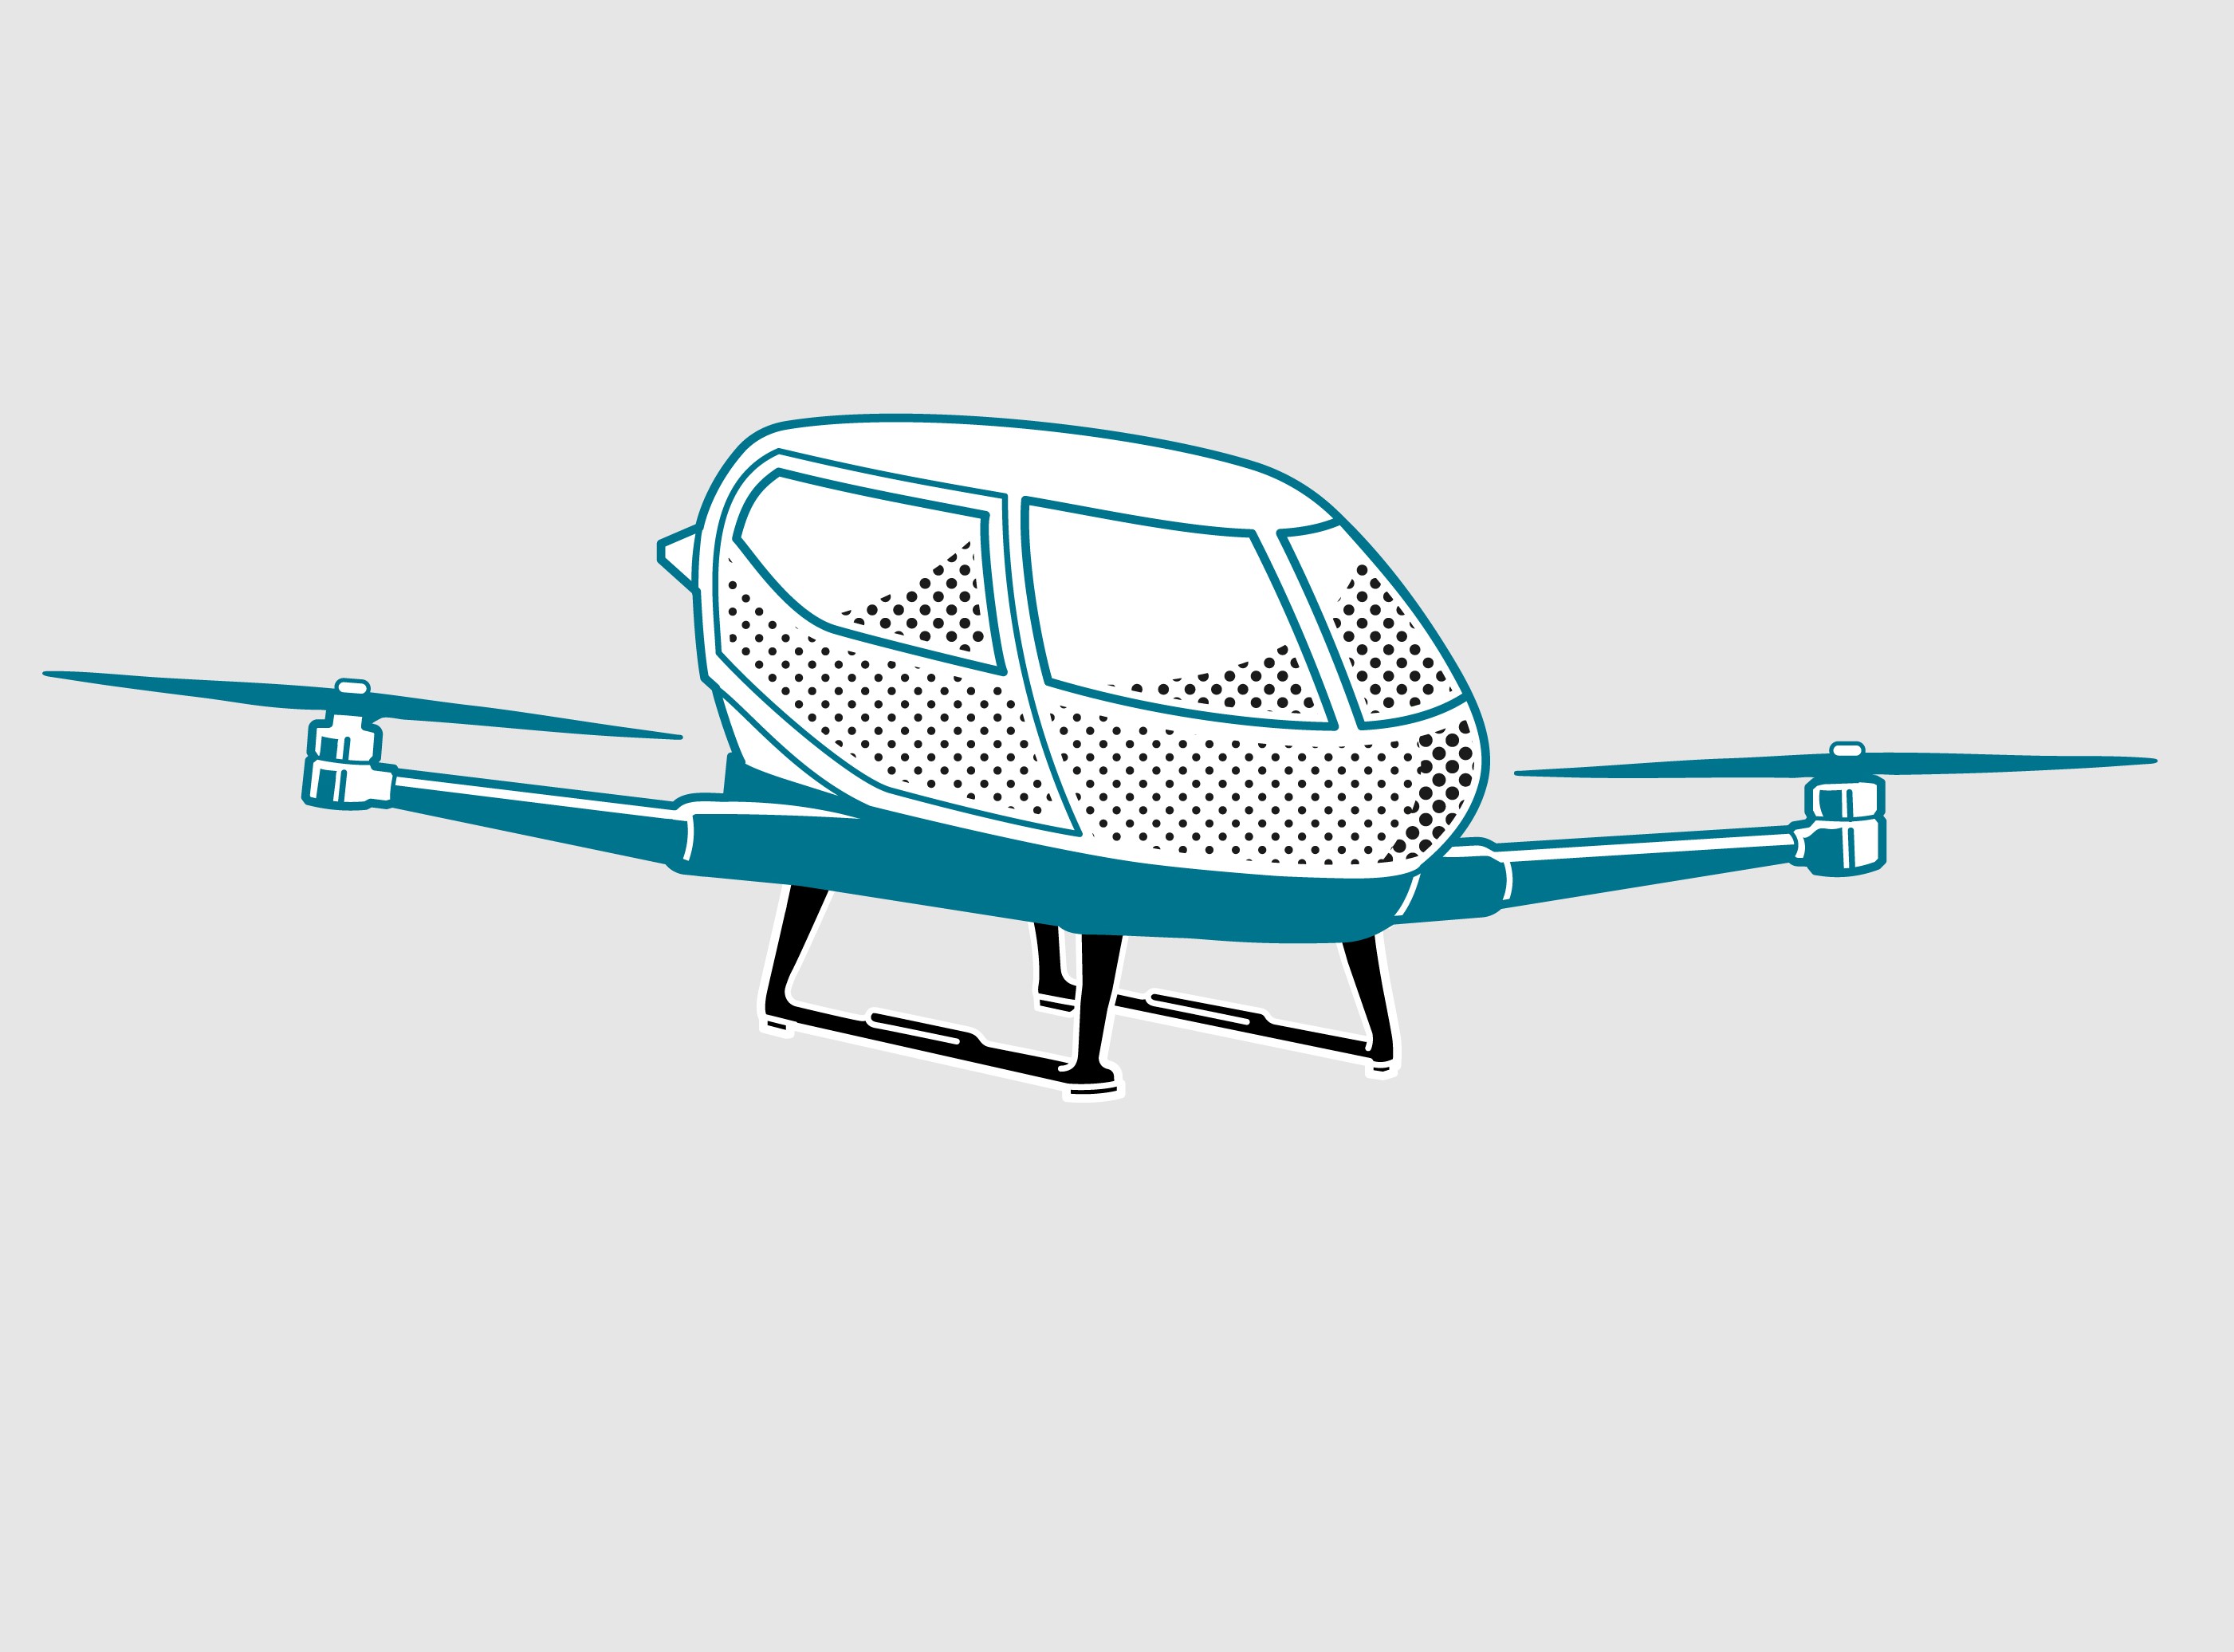 Design of air taxi (anonymized) with landing gear made of carbon fiber based composites.